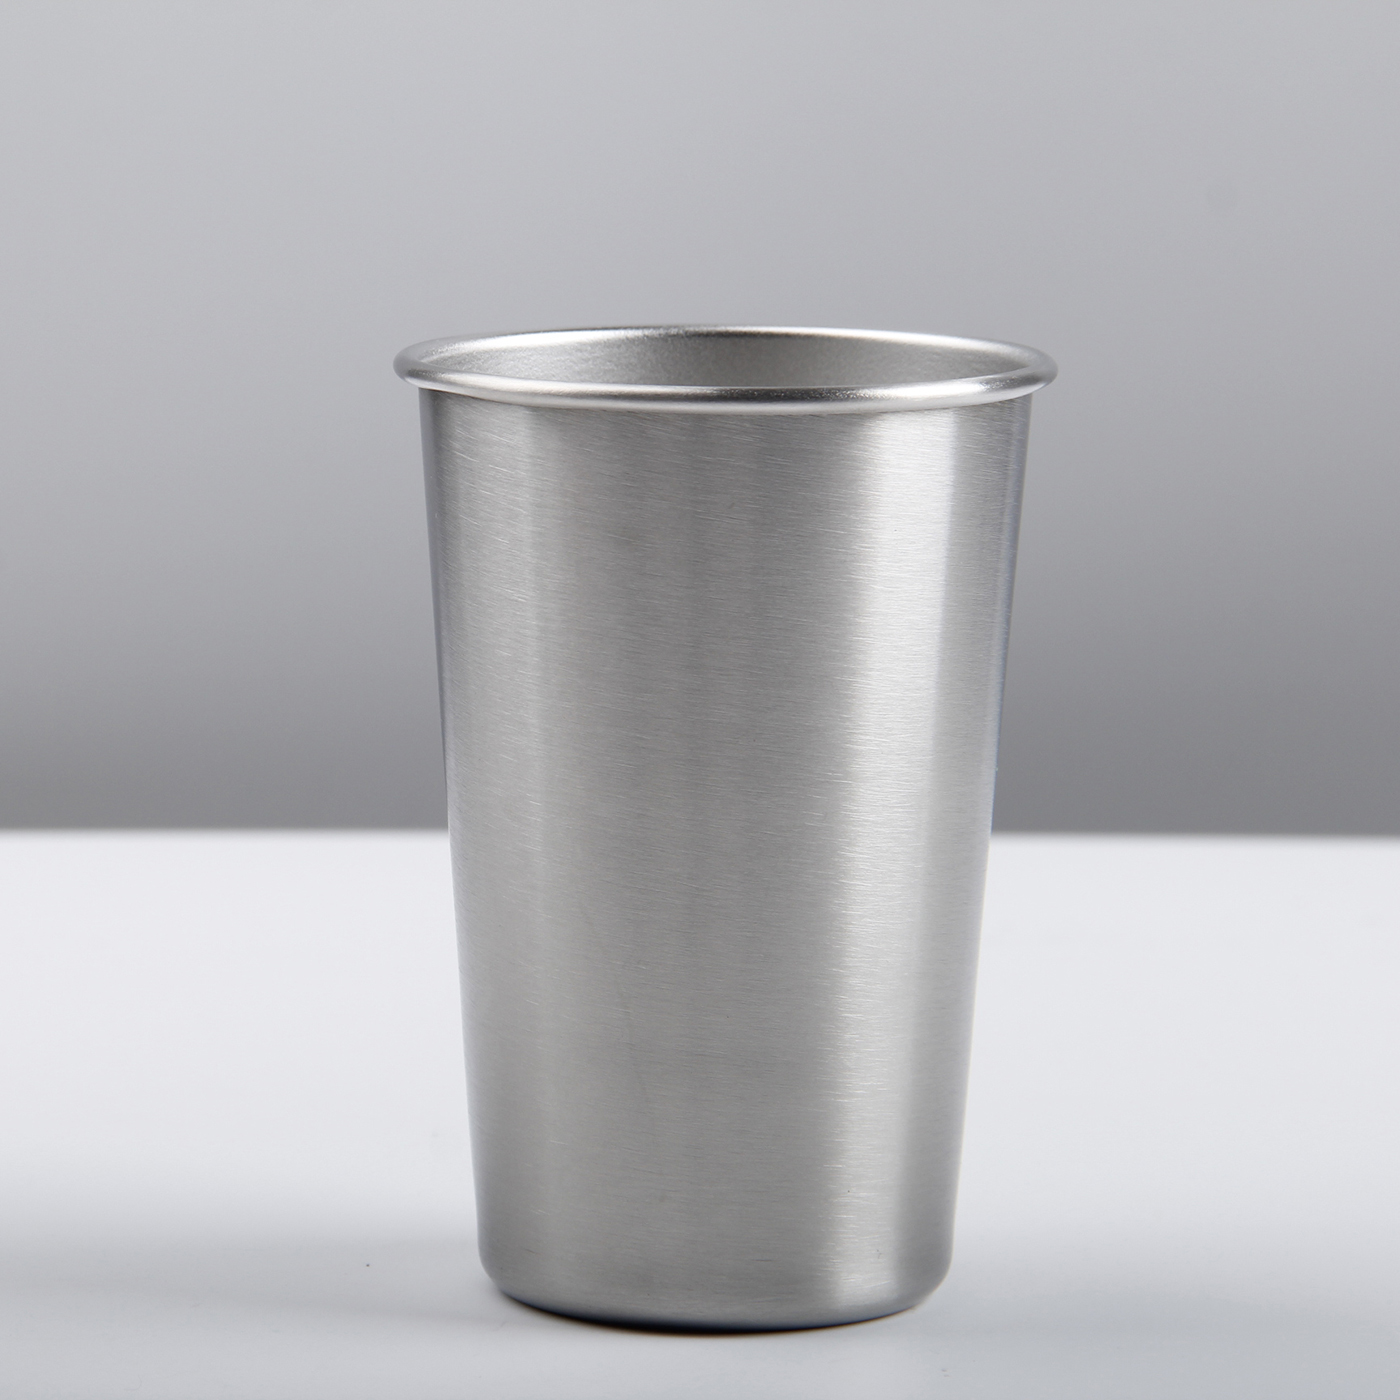 6 oz. Stainless Steel Pint Drinking Cup3